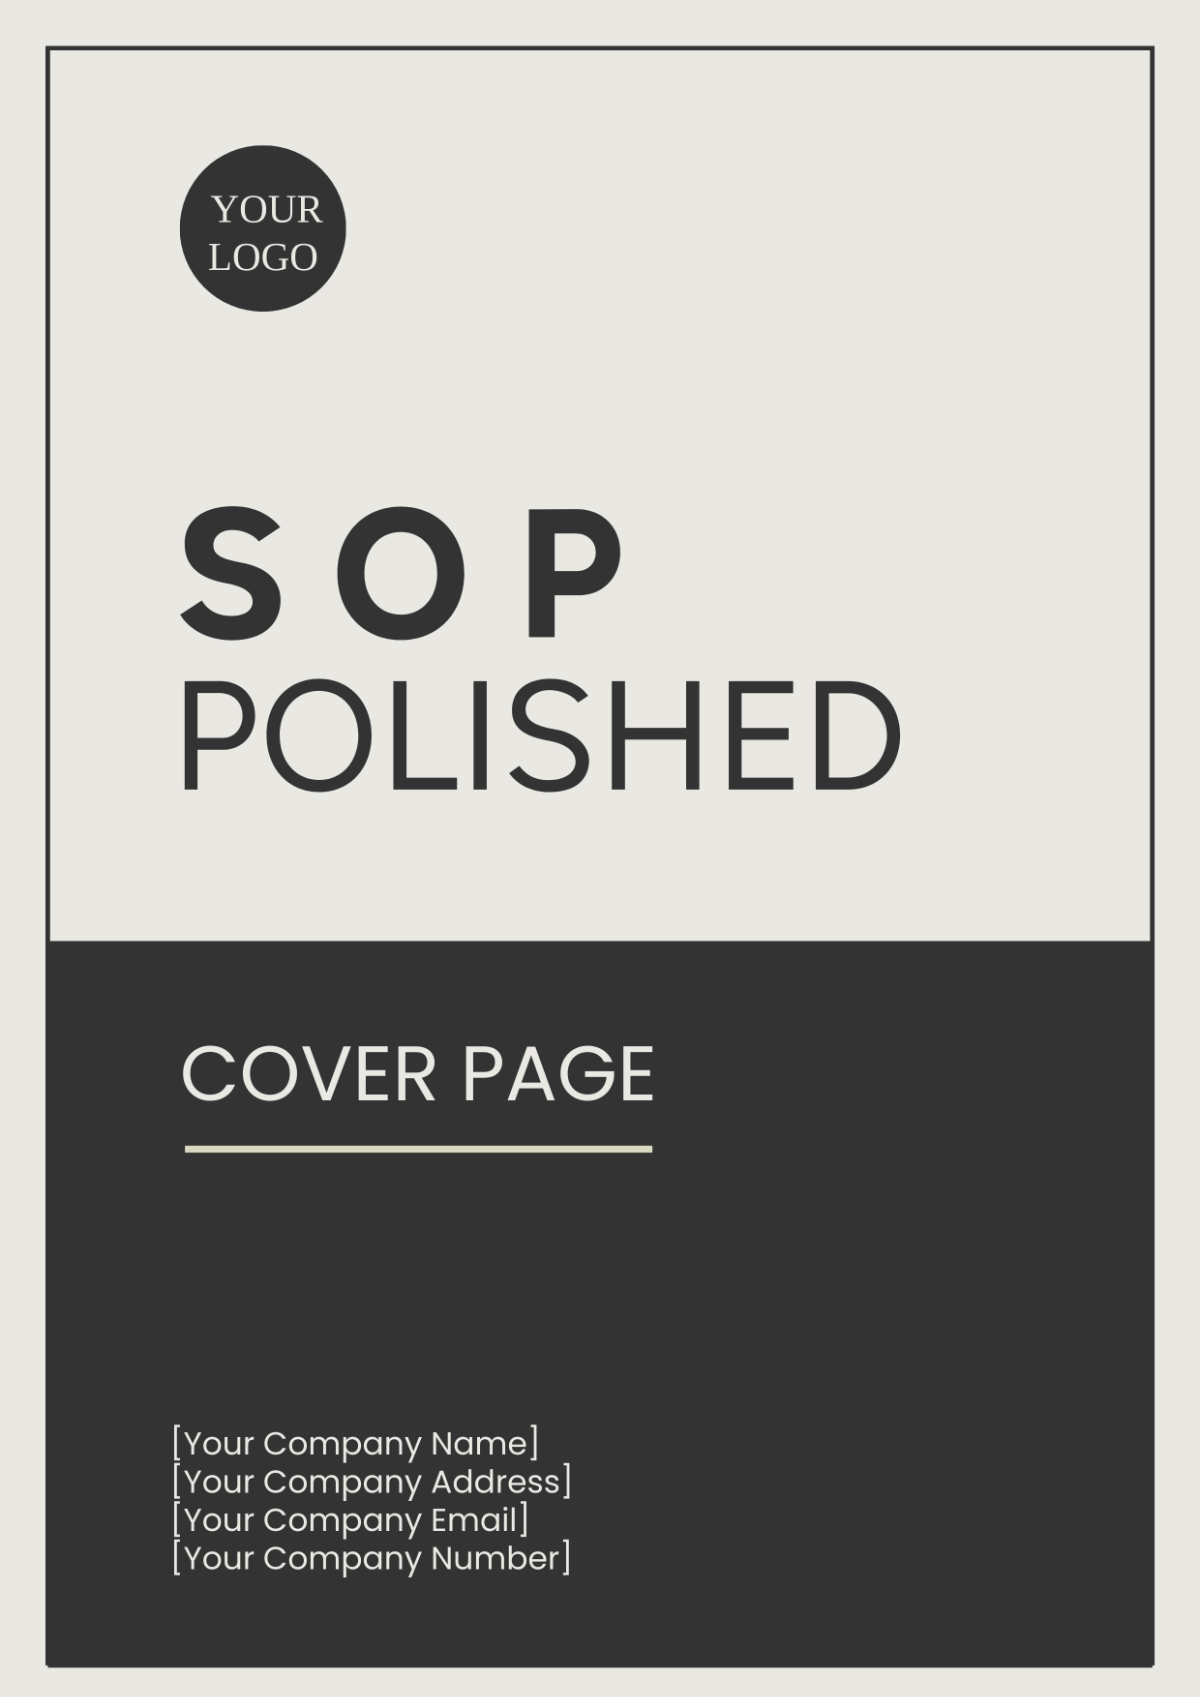 SOP Polished Cover Page